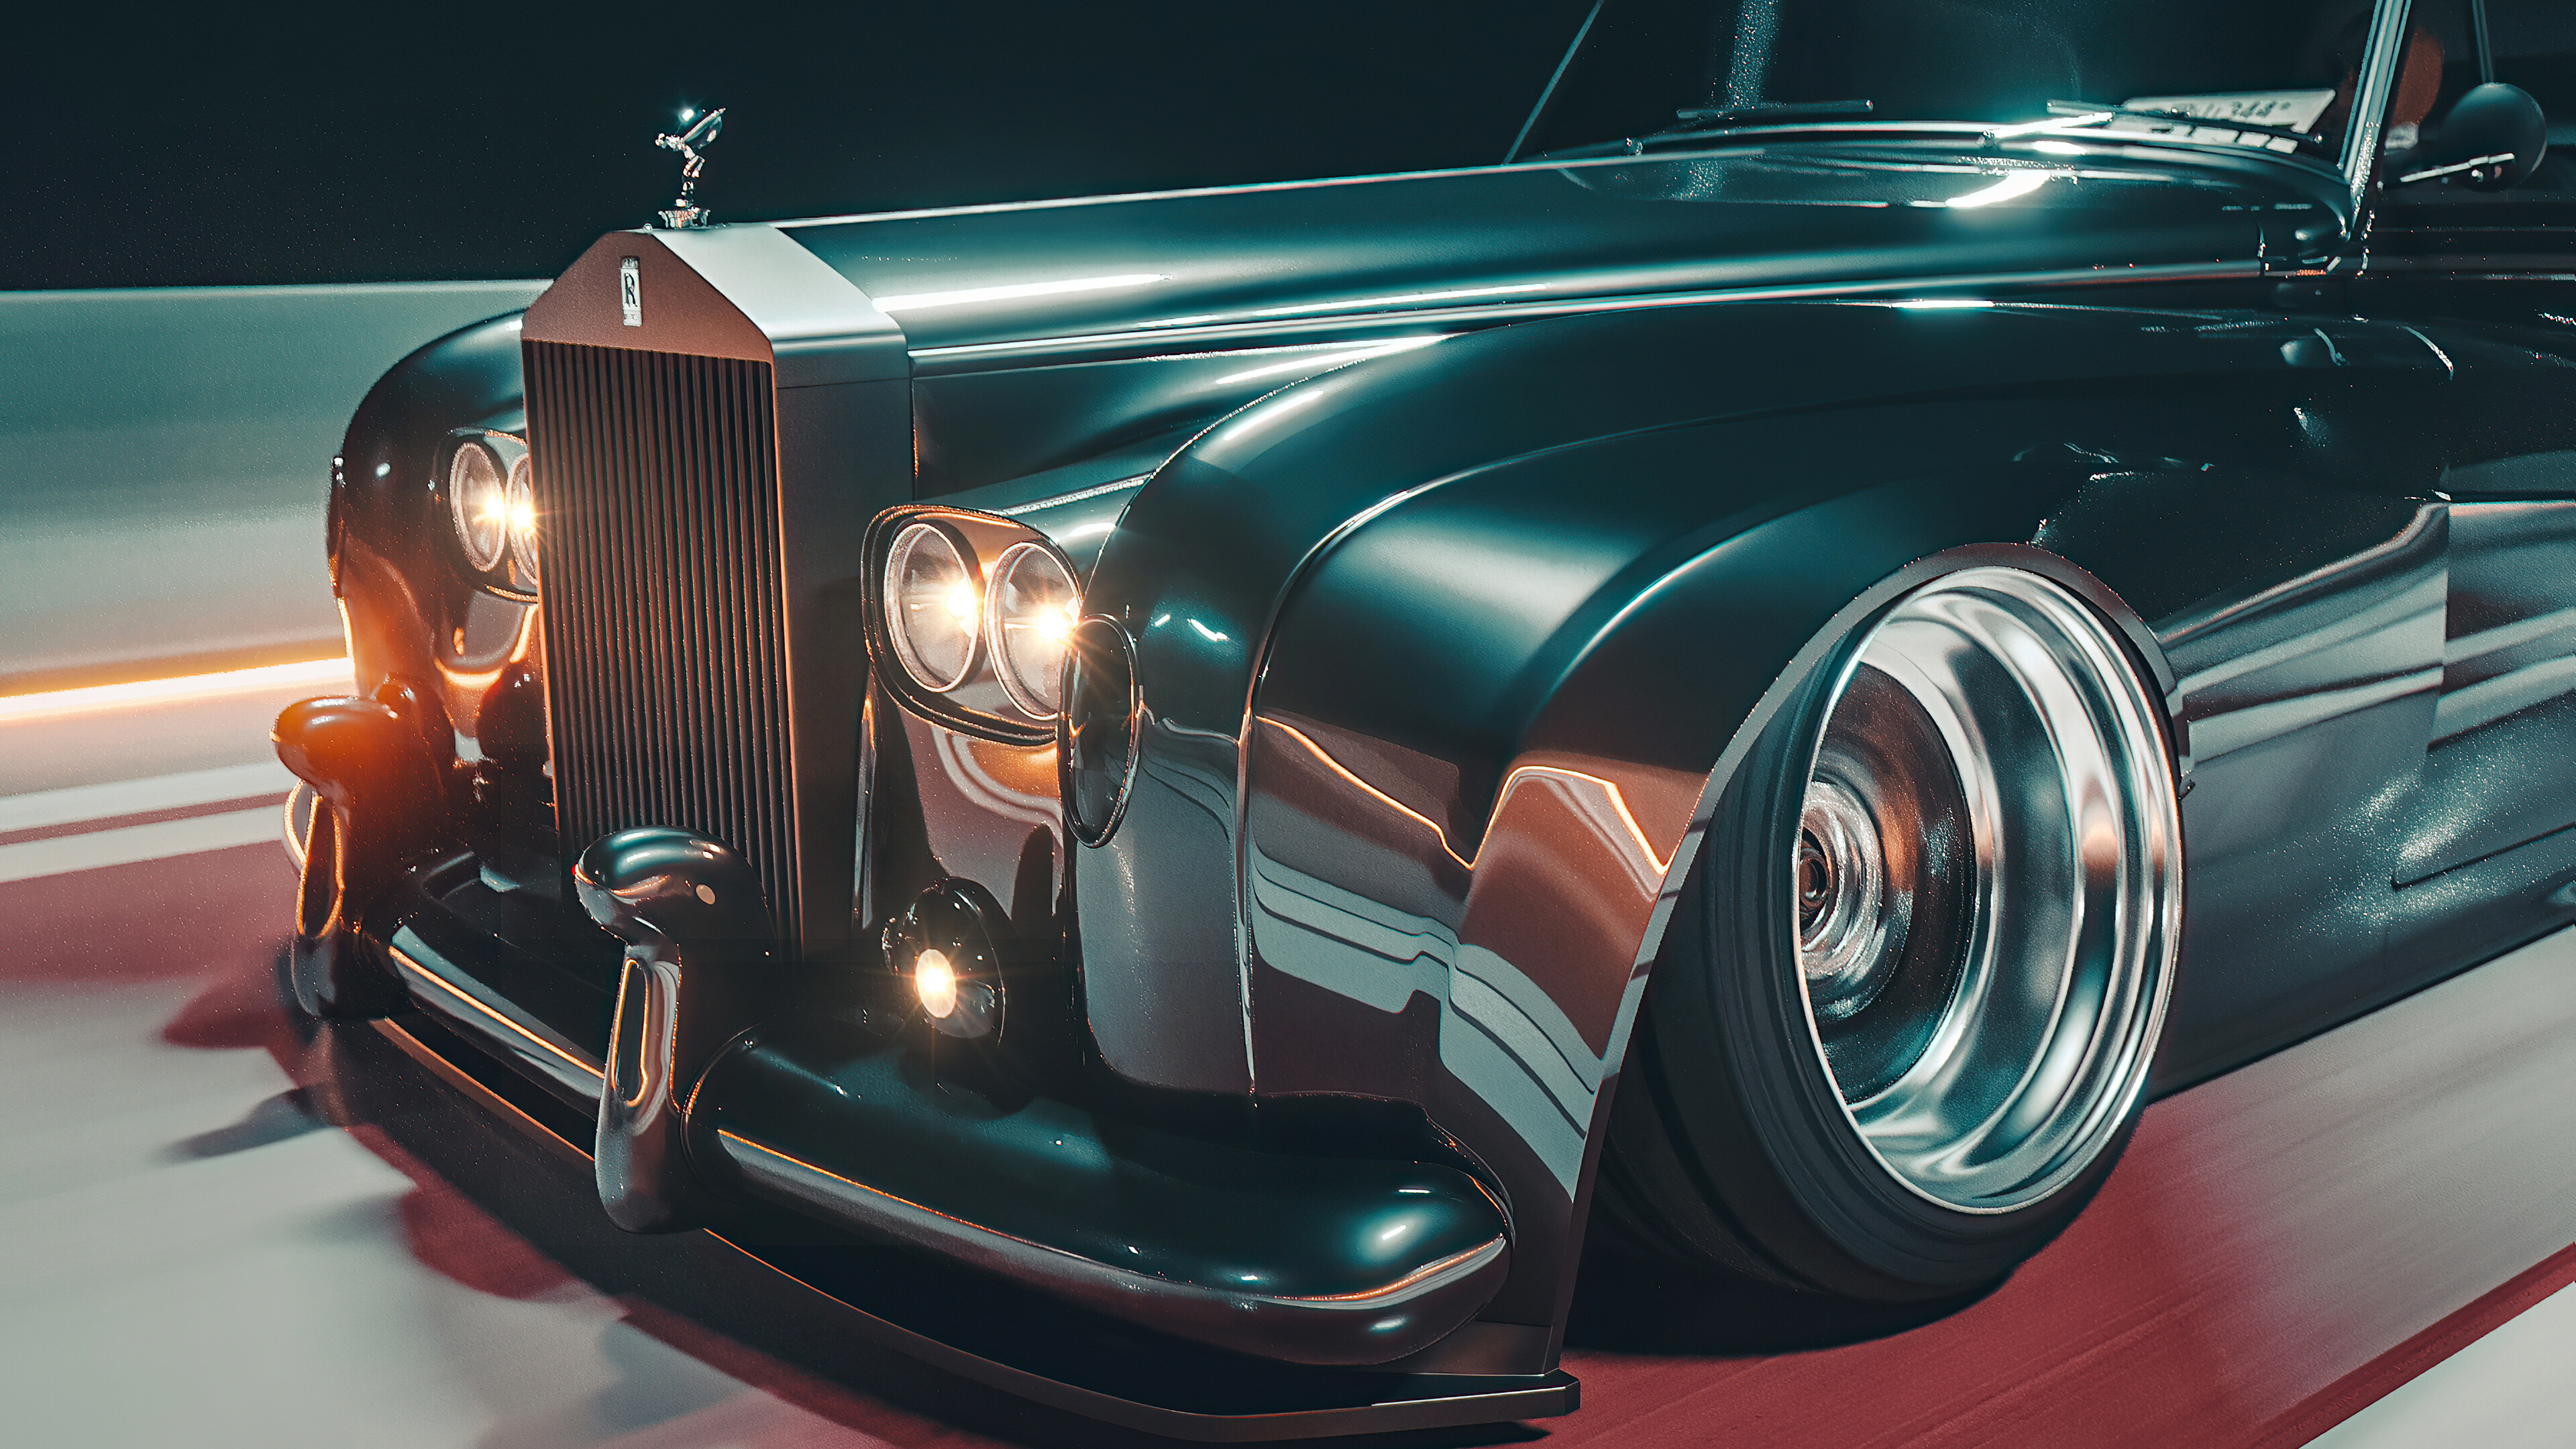 Rolls-Royce: Vintage cars, The 40/50 Phantom was introduced in 1925. 3840x2160 4K Wallpaper.